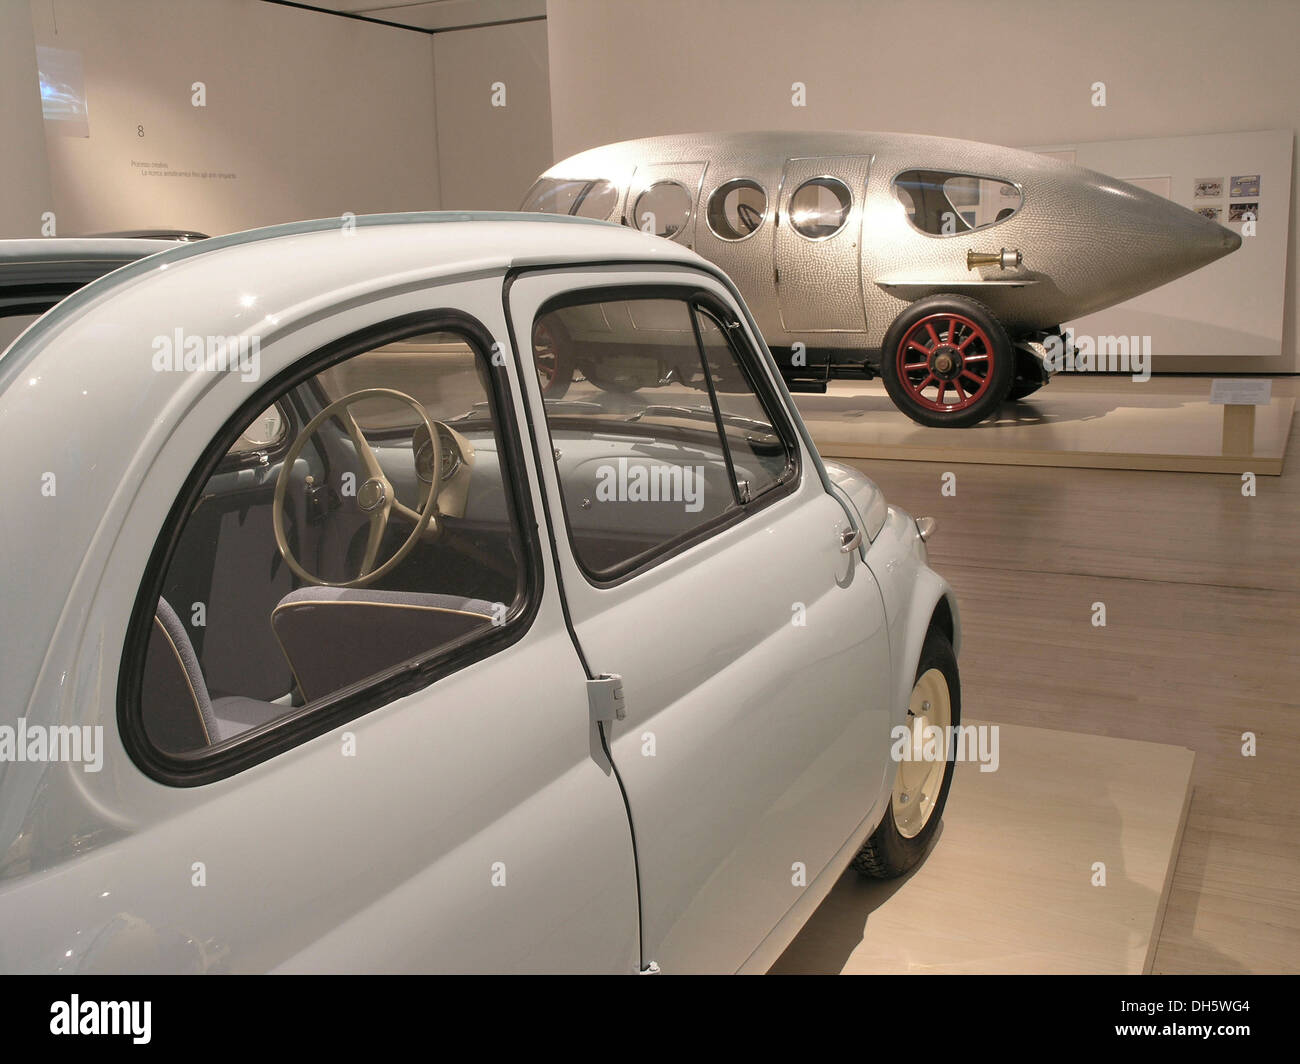 Fiat 500 in front of an Alfa 40, 60 HP Ricotti, Mitomacchina exhibition, Museum of Modern Art, MART, Rovereto, Italy, Europe Stock Photo